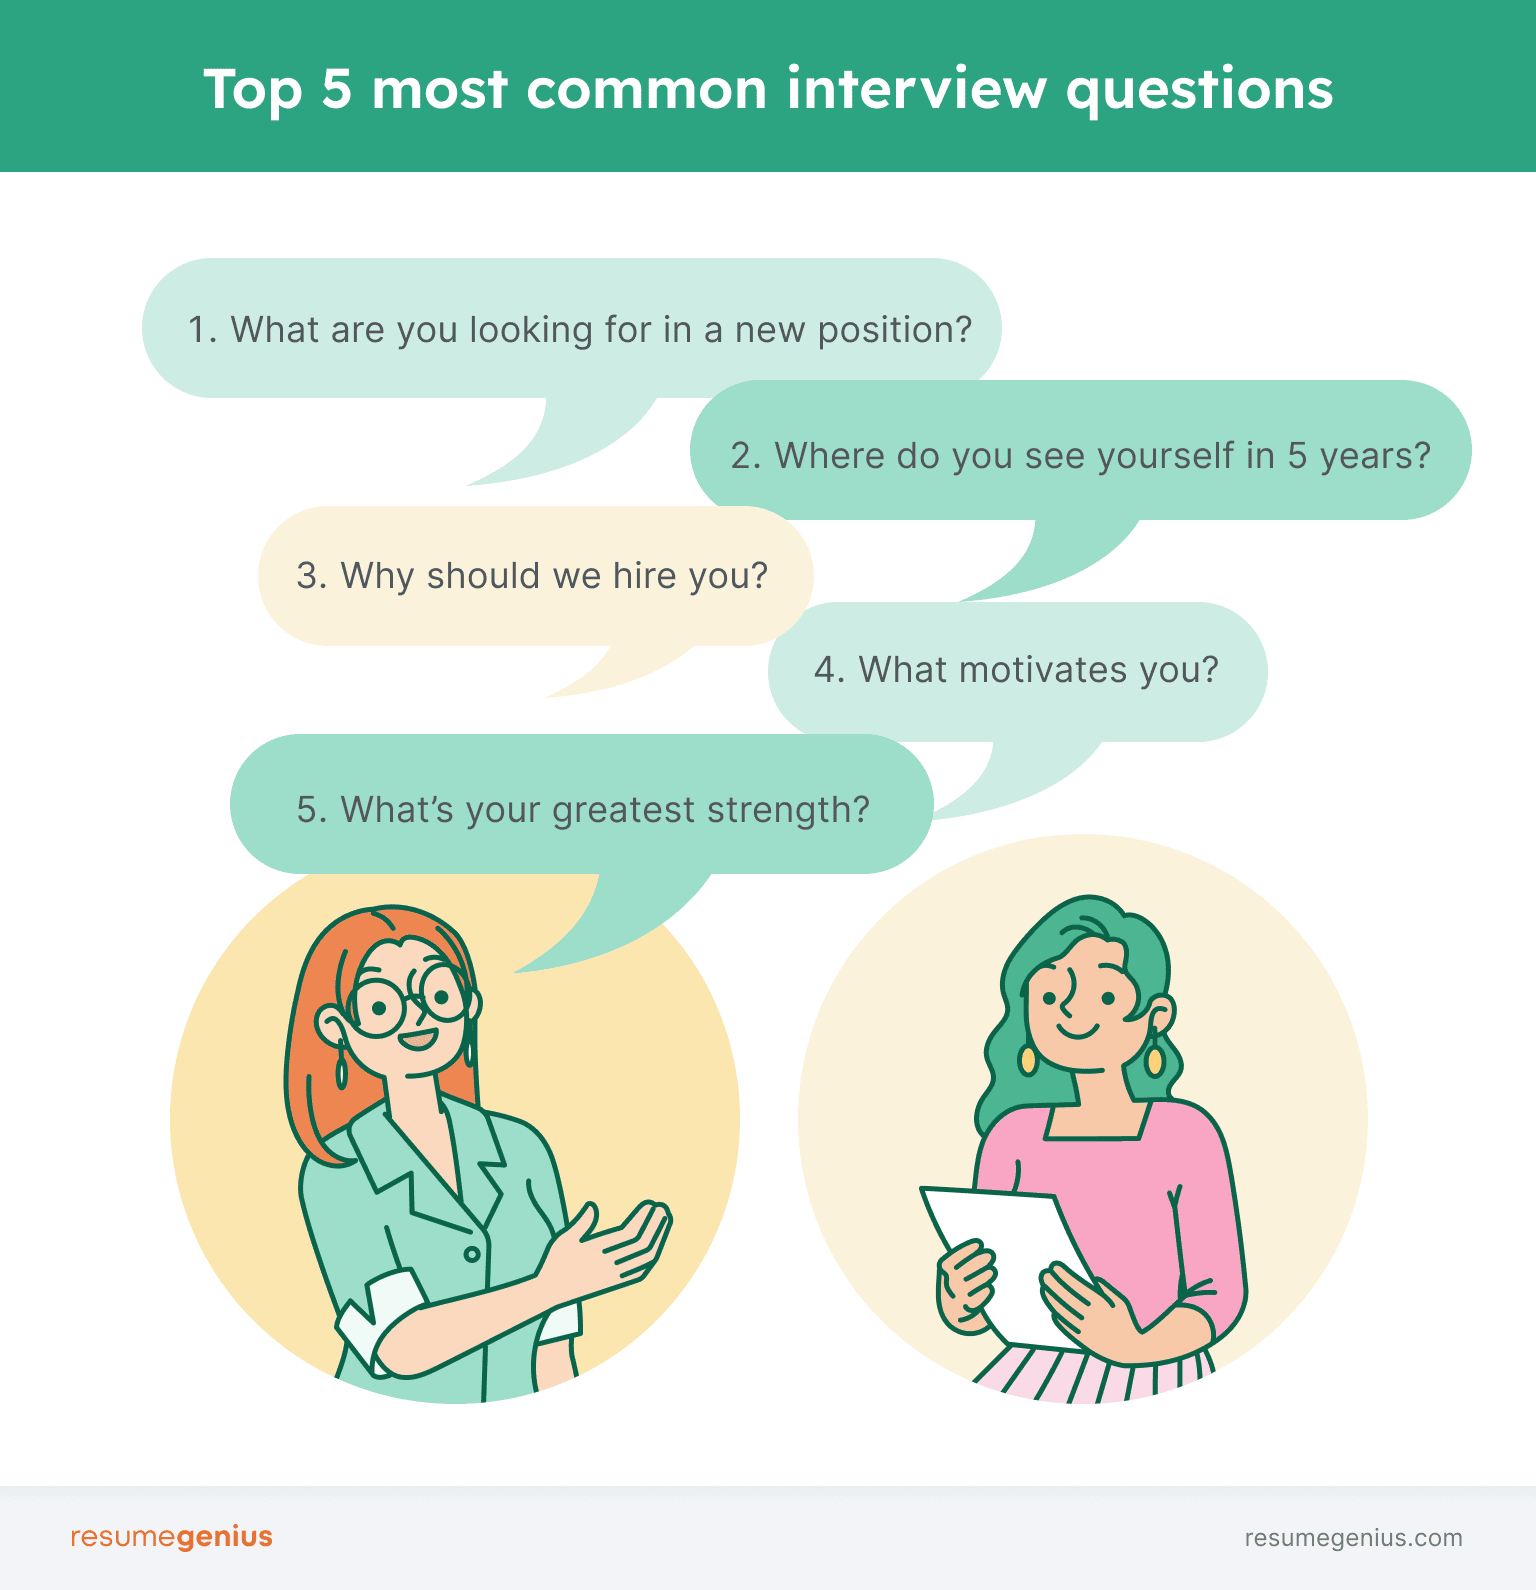 An infographic breaking down the top 5 most common interview questions